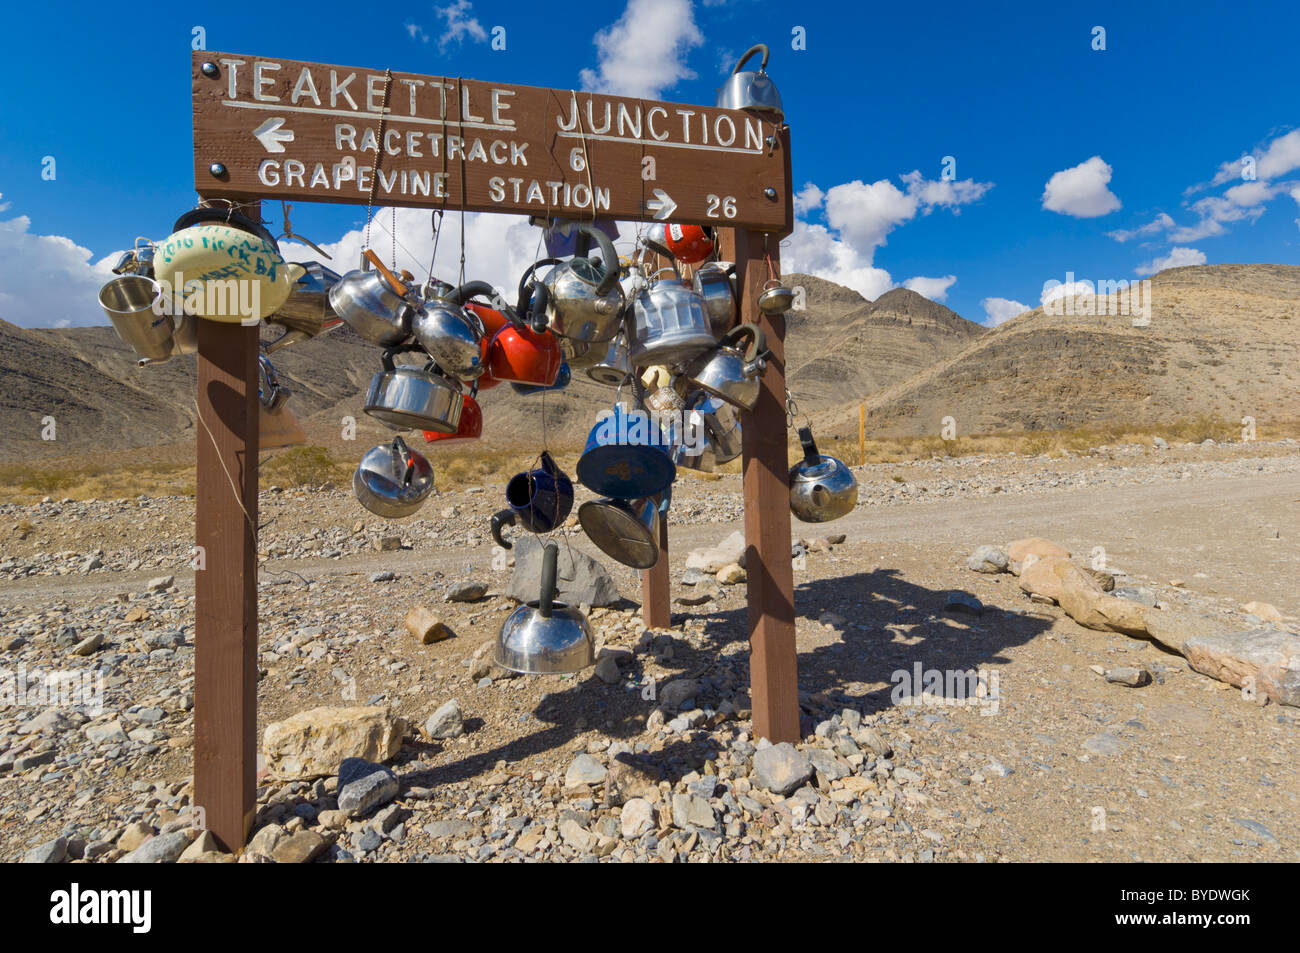 Teakettle Junction and road sign covered by kettles and pots, on the road to The Racetrack in  Death Valley National Park, Inyo County,California, USA Stock Photo